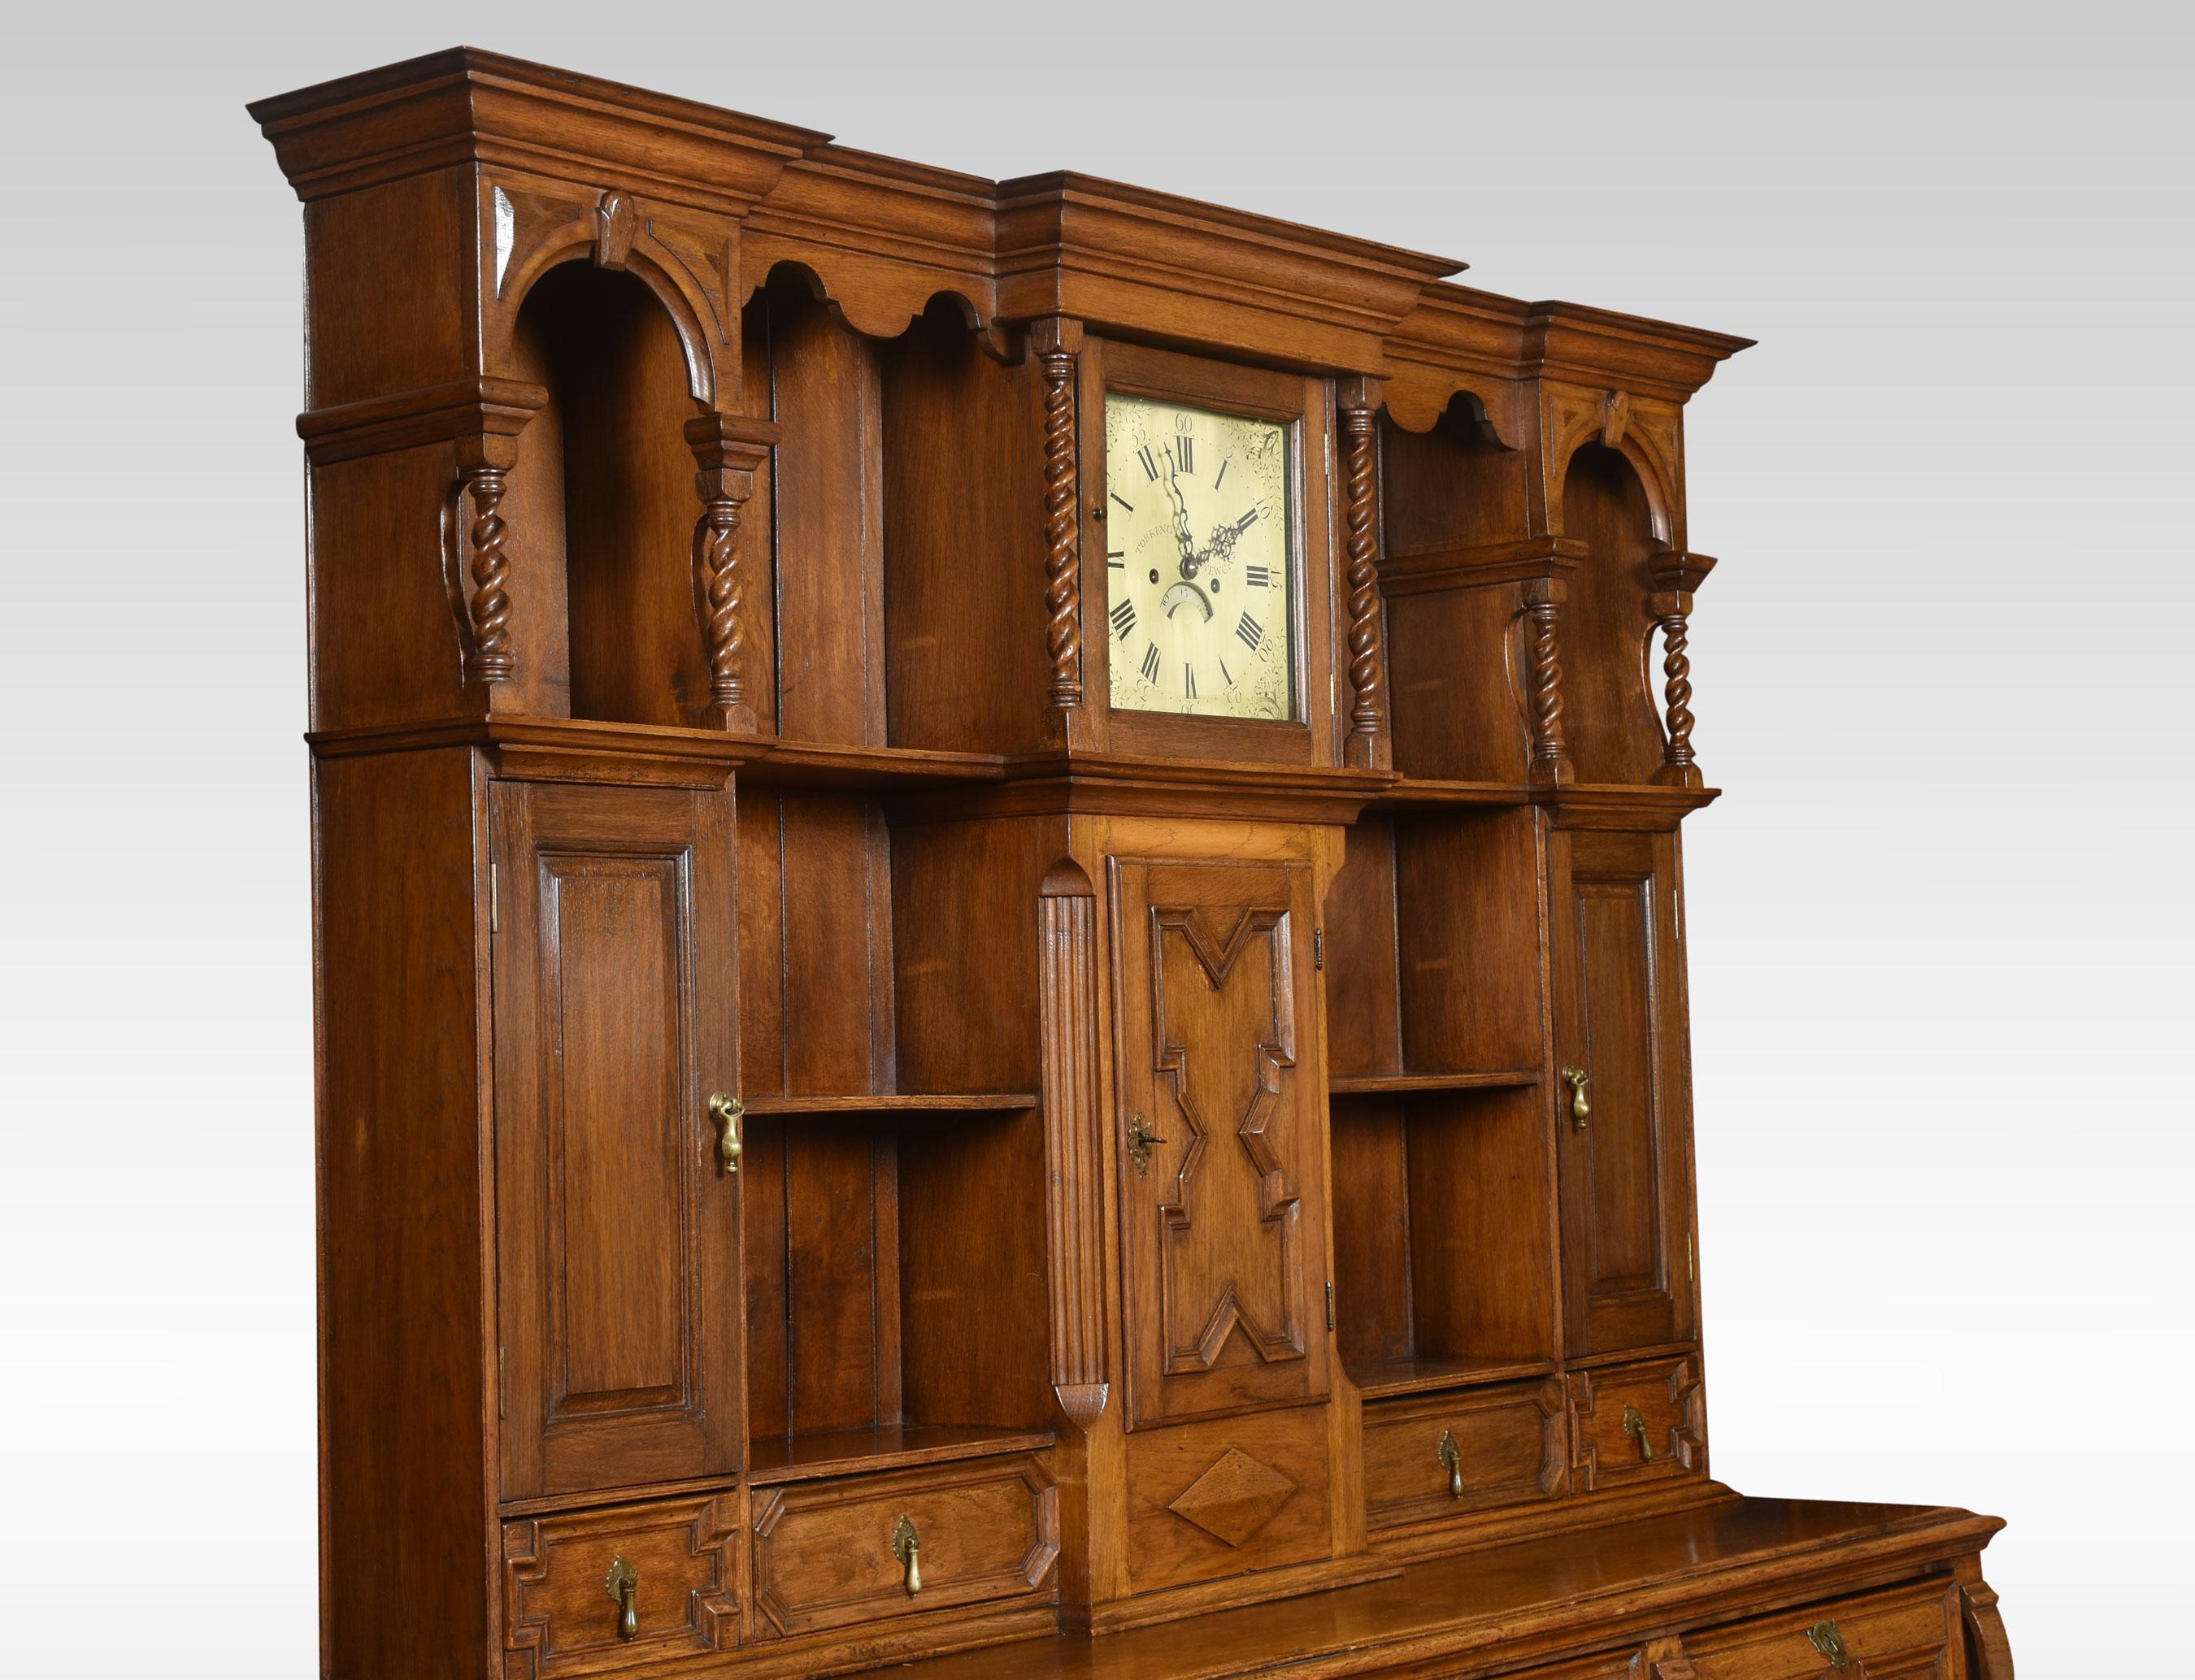 Jacobean style oak dresser, having a deep boarded rack with canopy frieze above an arrangement of shelves, drawers and cupboards, surrounding the eight-day clock with brass dial signed Torkington Newcastle, striking on a bell. The base section is